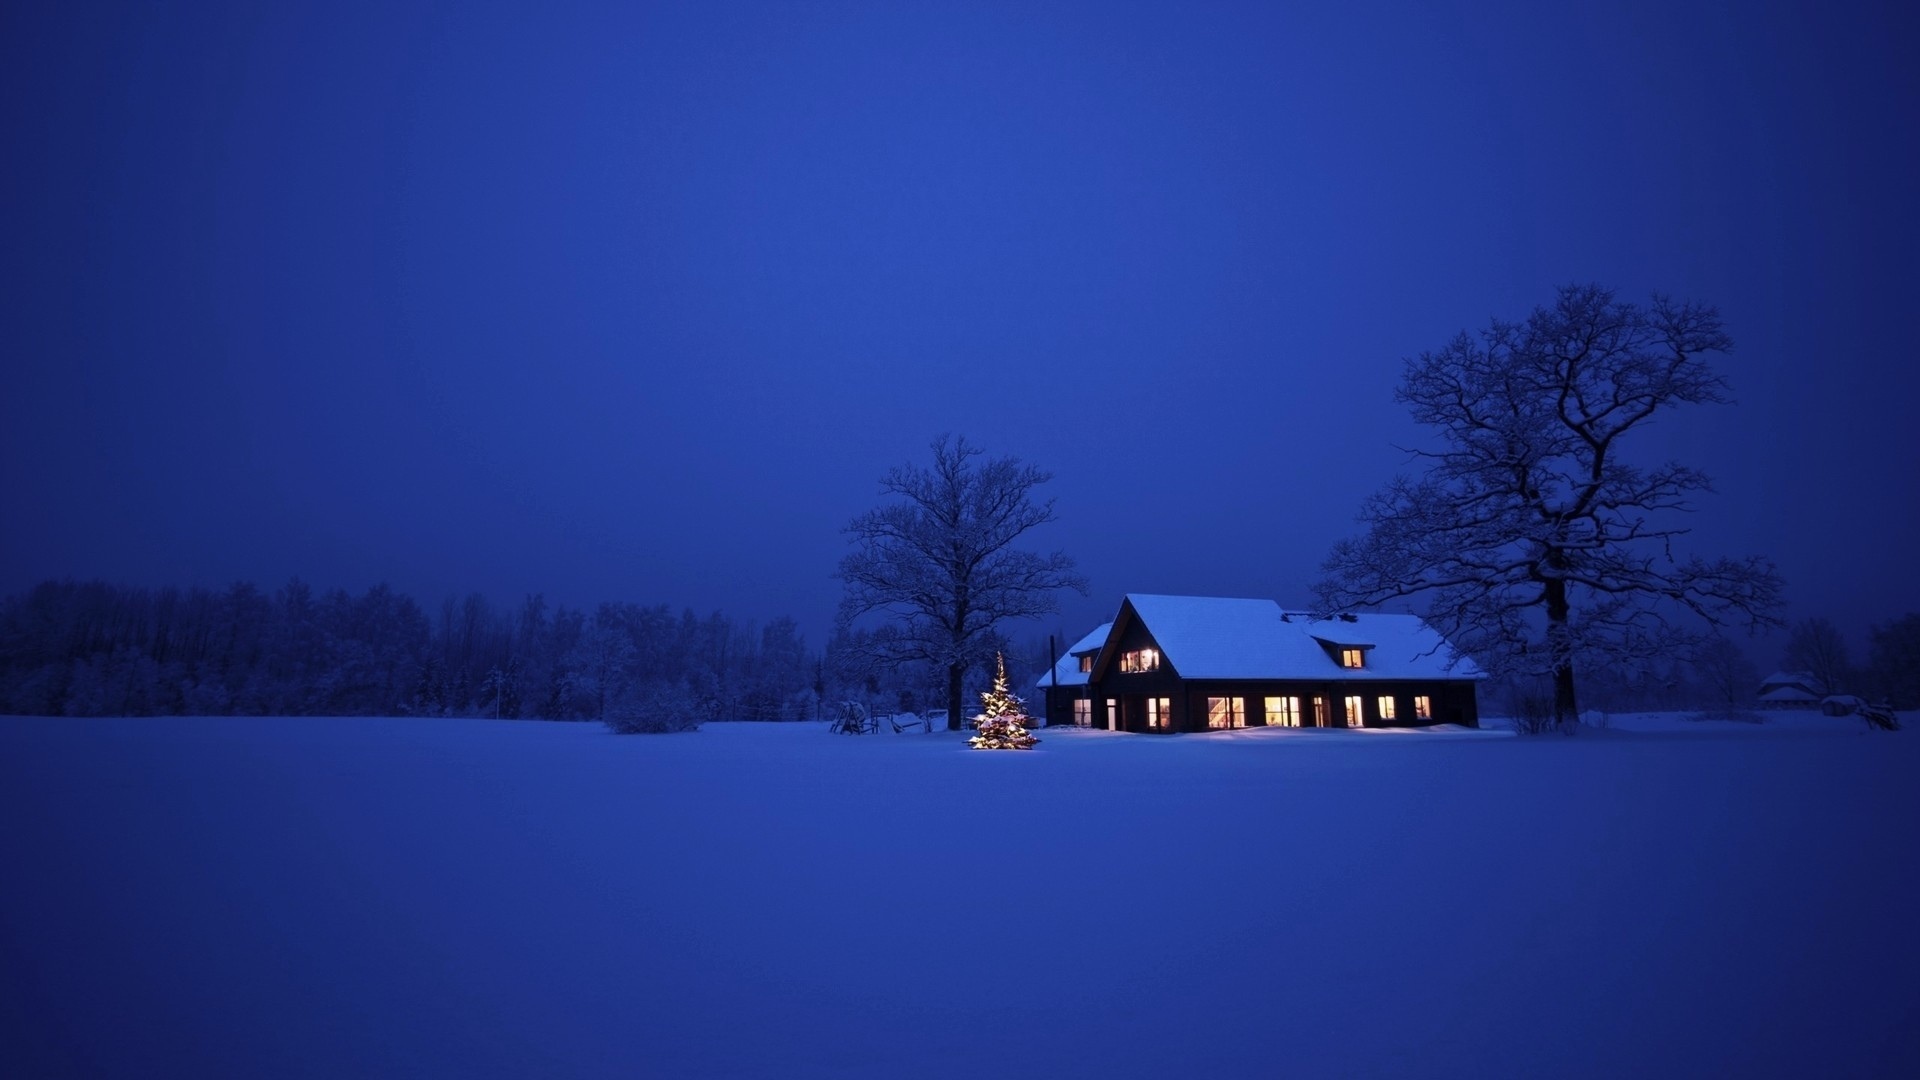 Free HD snow, houses, christmas xmas, new year, landscape, holidays, winter, blue